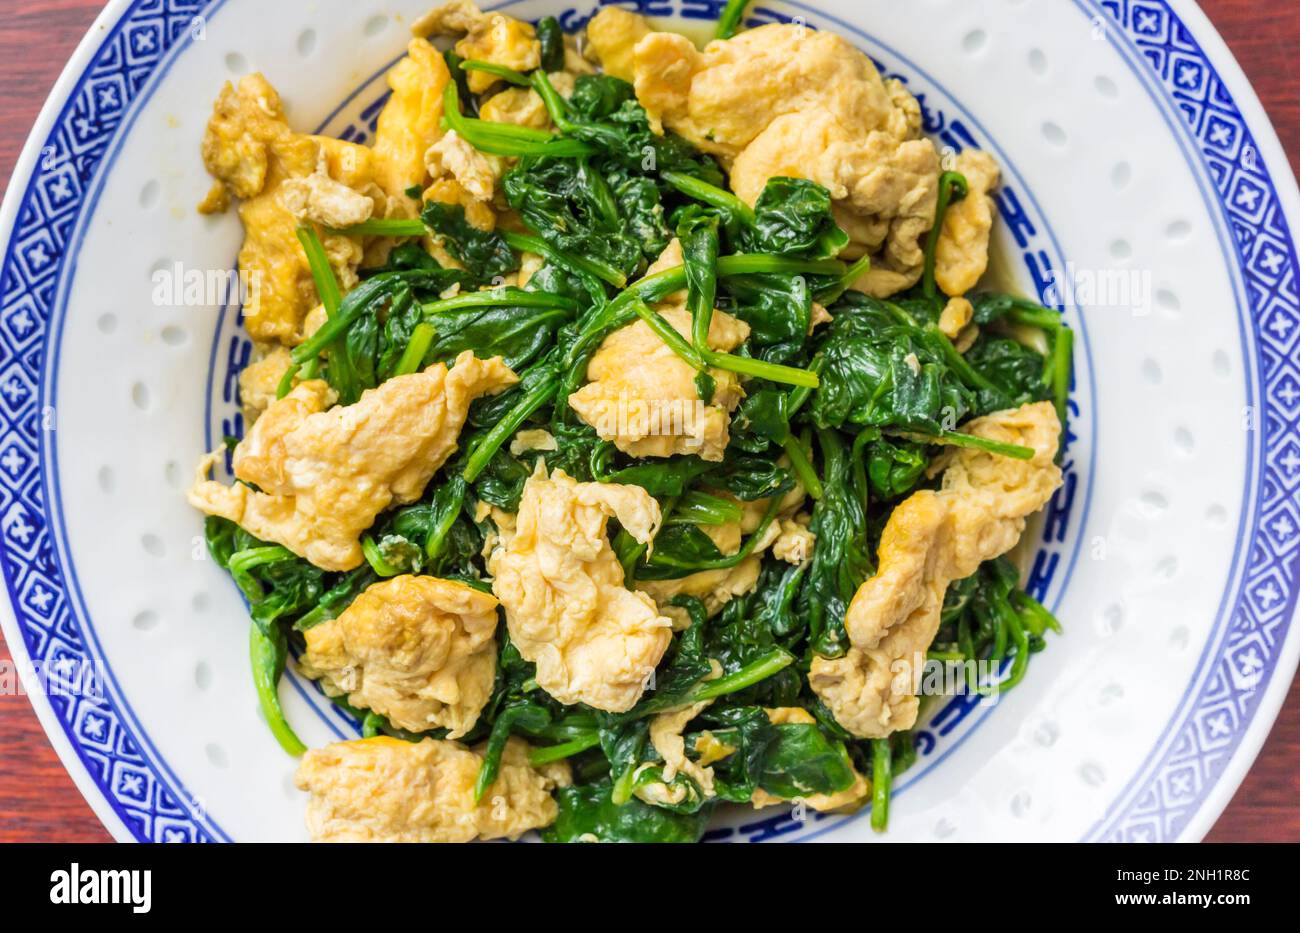 Traditional chinese stir fried vegetarian meal with egg and spinach Stock Photo